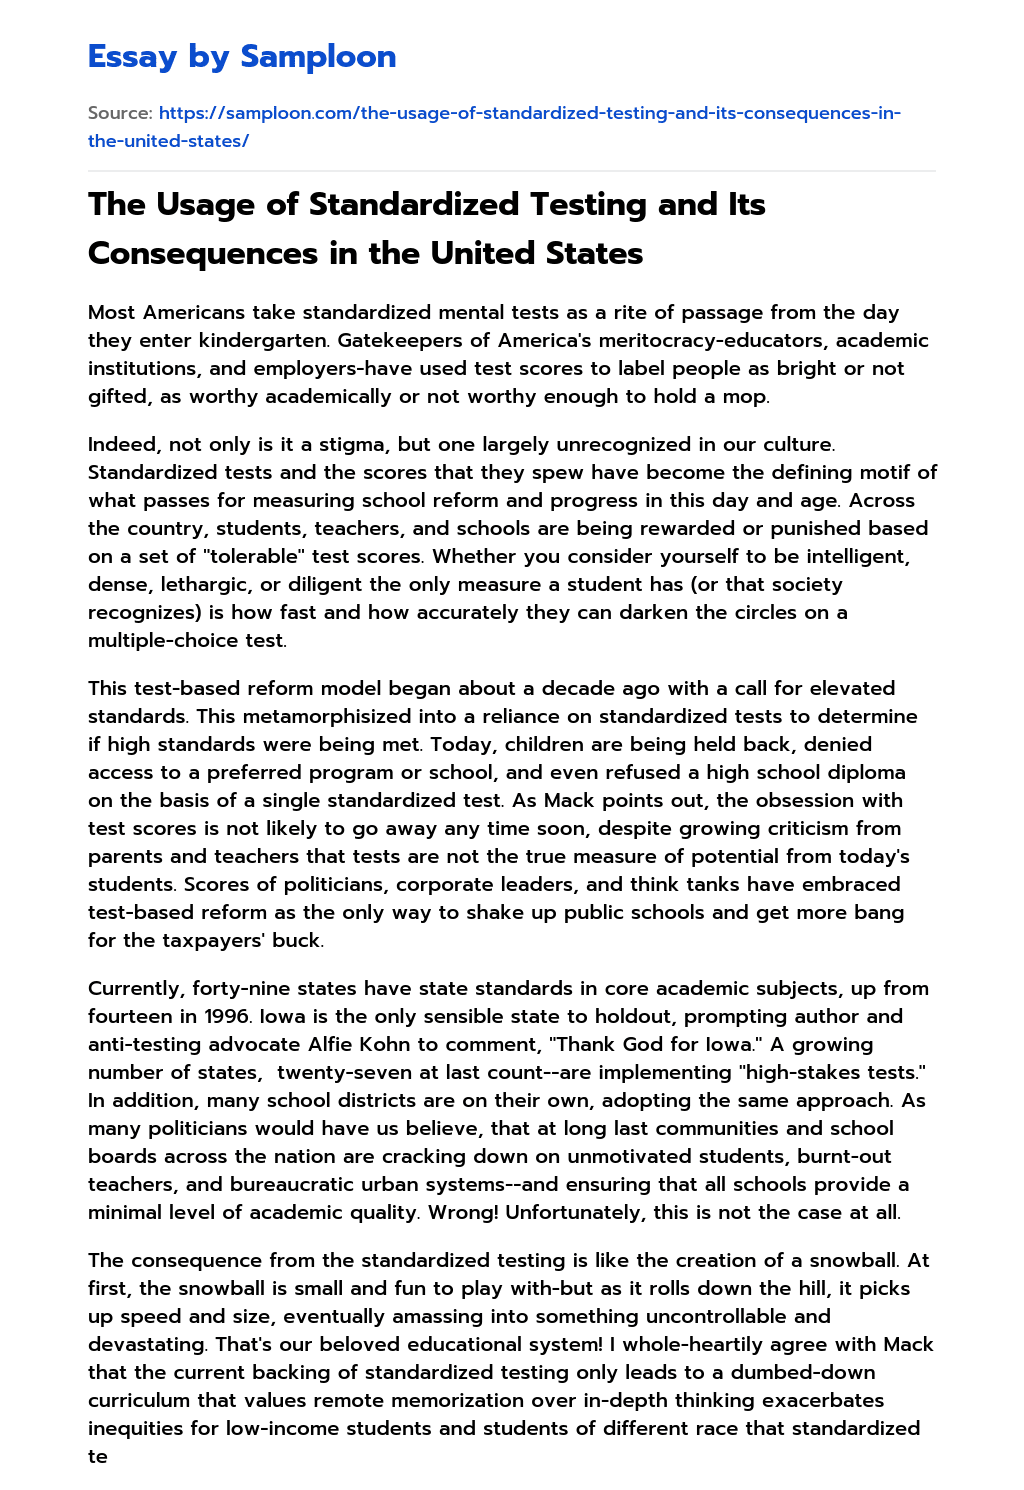 The Usage of Standardized Testing and Its Consequences in the United States essay